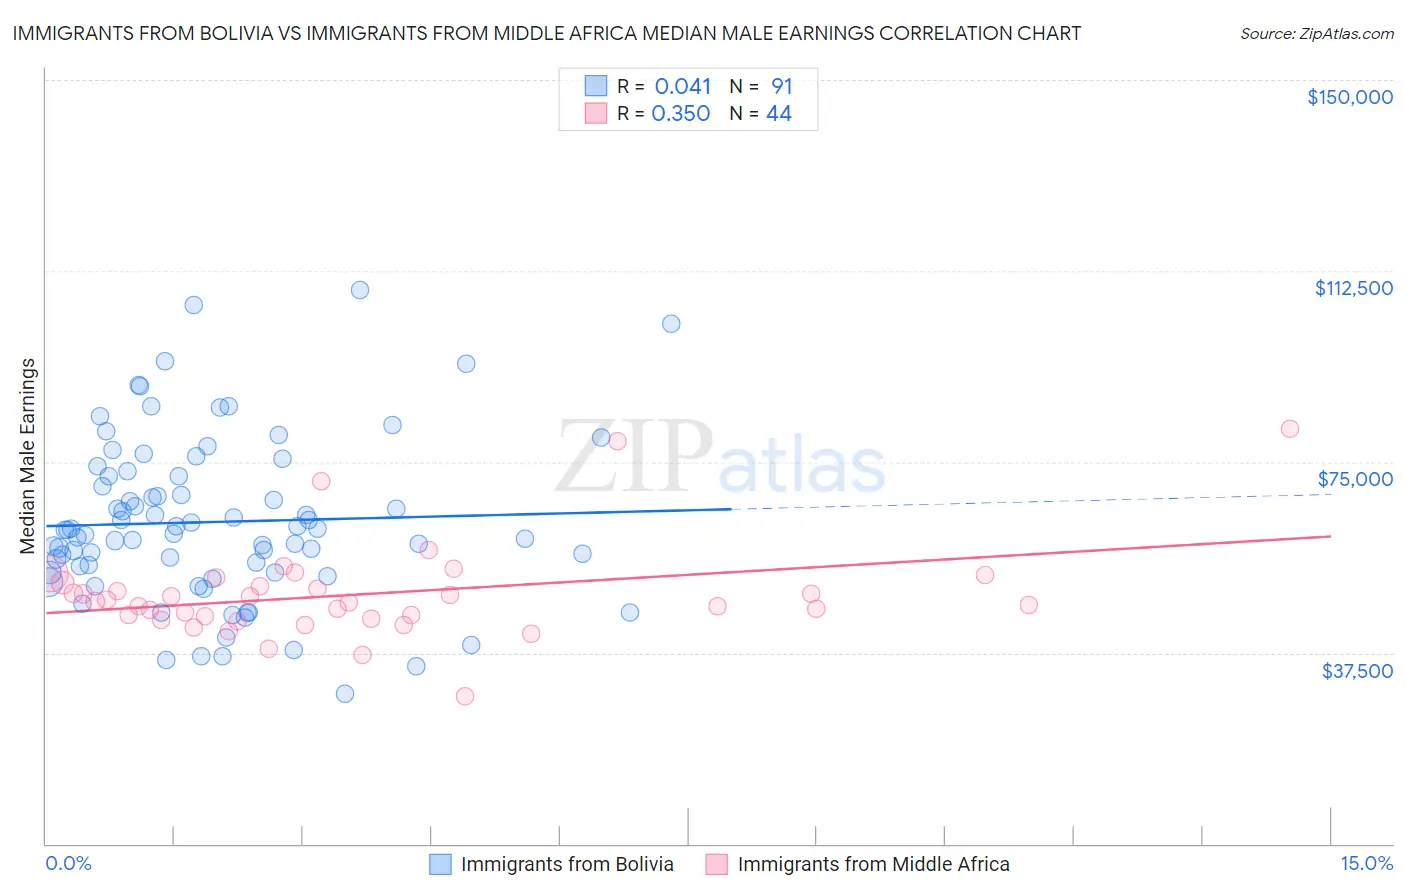 Immigrants from Bolivia vs Immigrants from Middle Africa Median Male Earnings